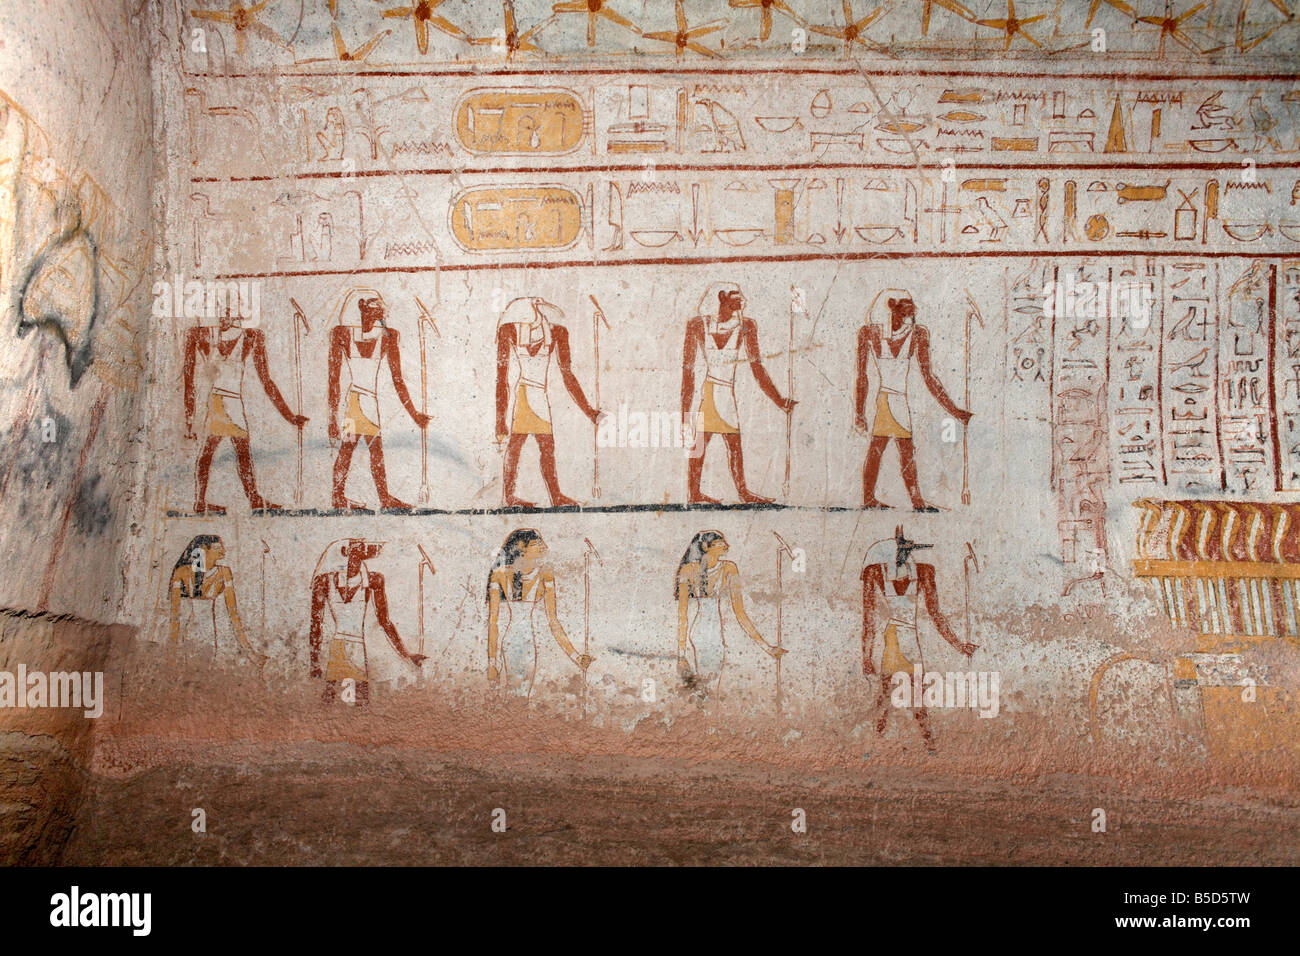 wall-paintings-in-the-tomb-of-king-tanwetamani-part-of-the-royal-cemetery-B5D5TW.jpg